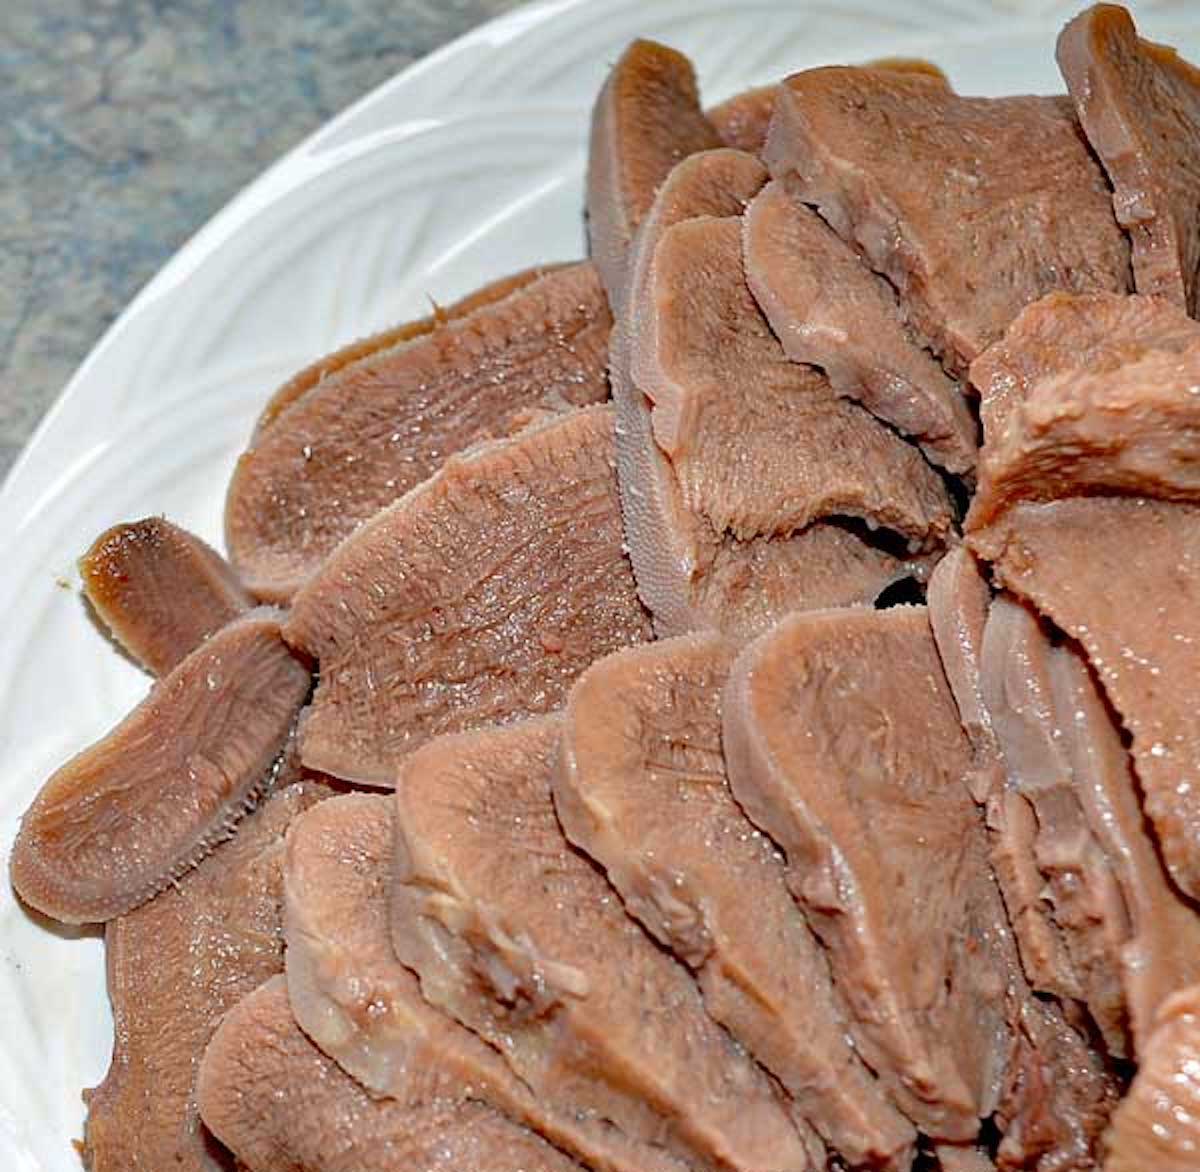 11 Insanely Delicious Beef Tongue Recipes For When You’Re Feeling Adventurous